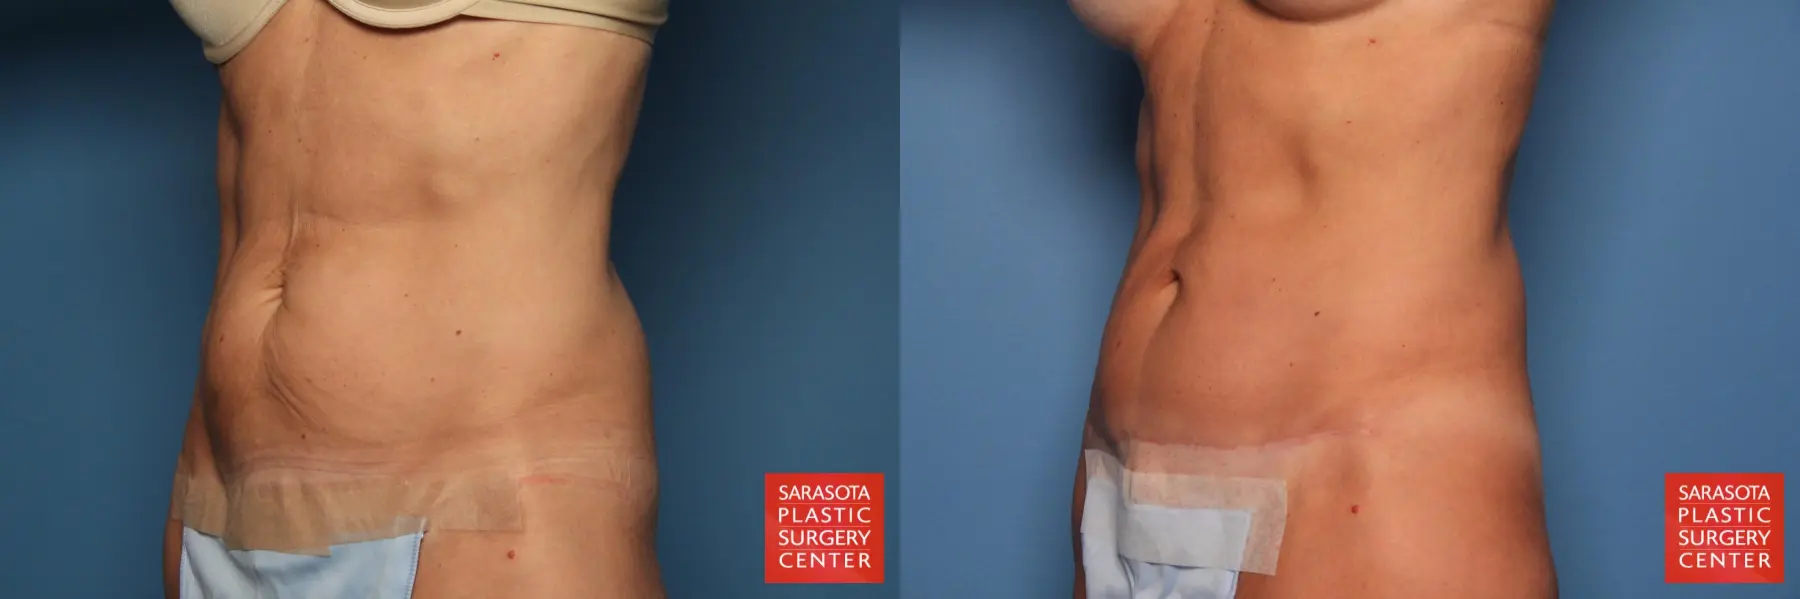 Mini Tummy Tuck: Patient 2 - Before and After 2